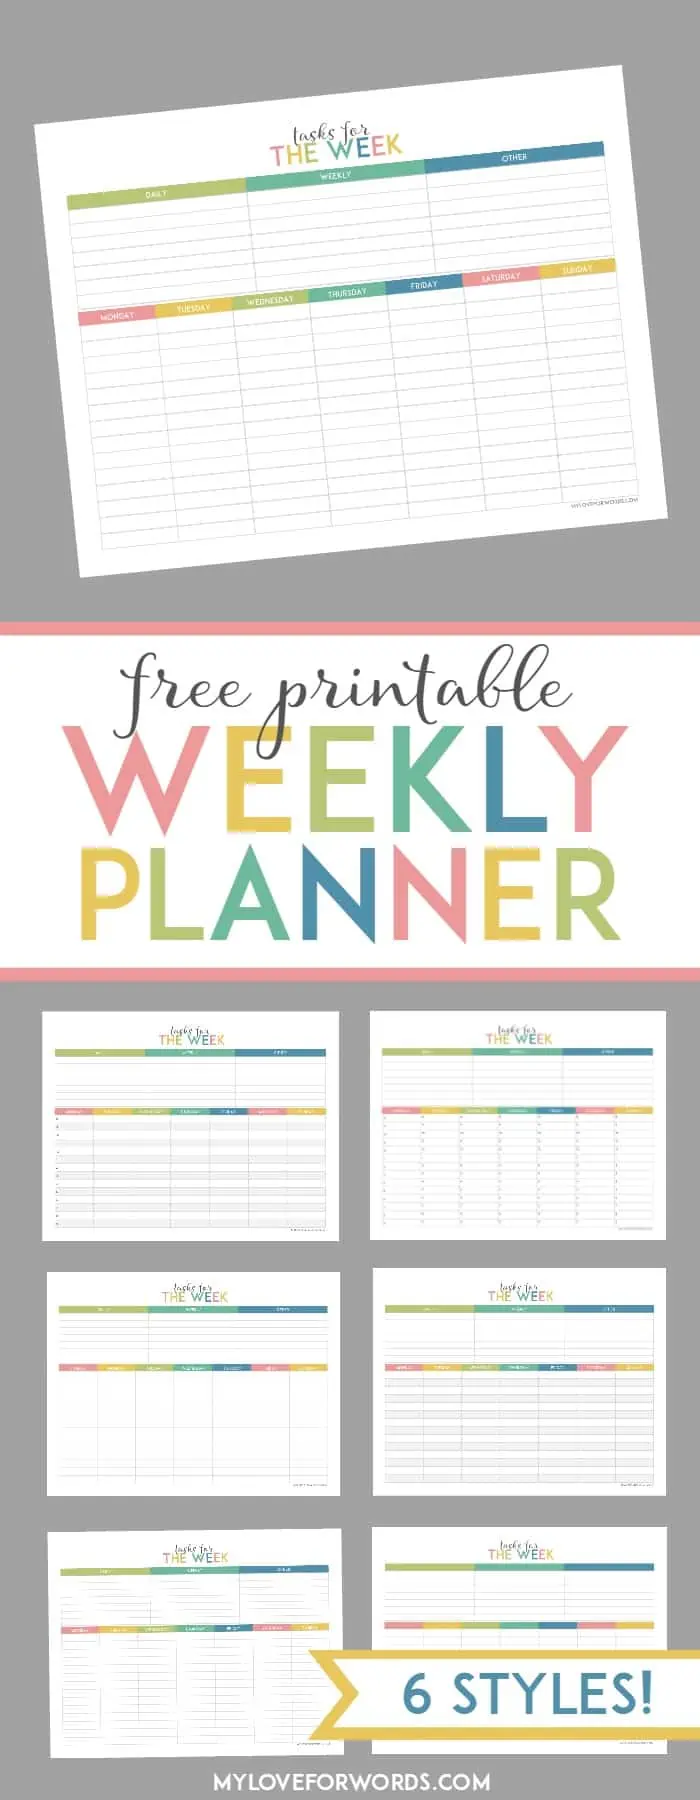 FREE PRINTABLES!! I love using these printables to maximize my productivity and get more done! Now nothing's falling through the cracks.